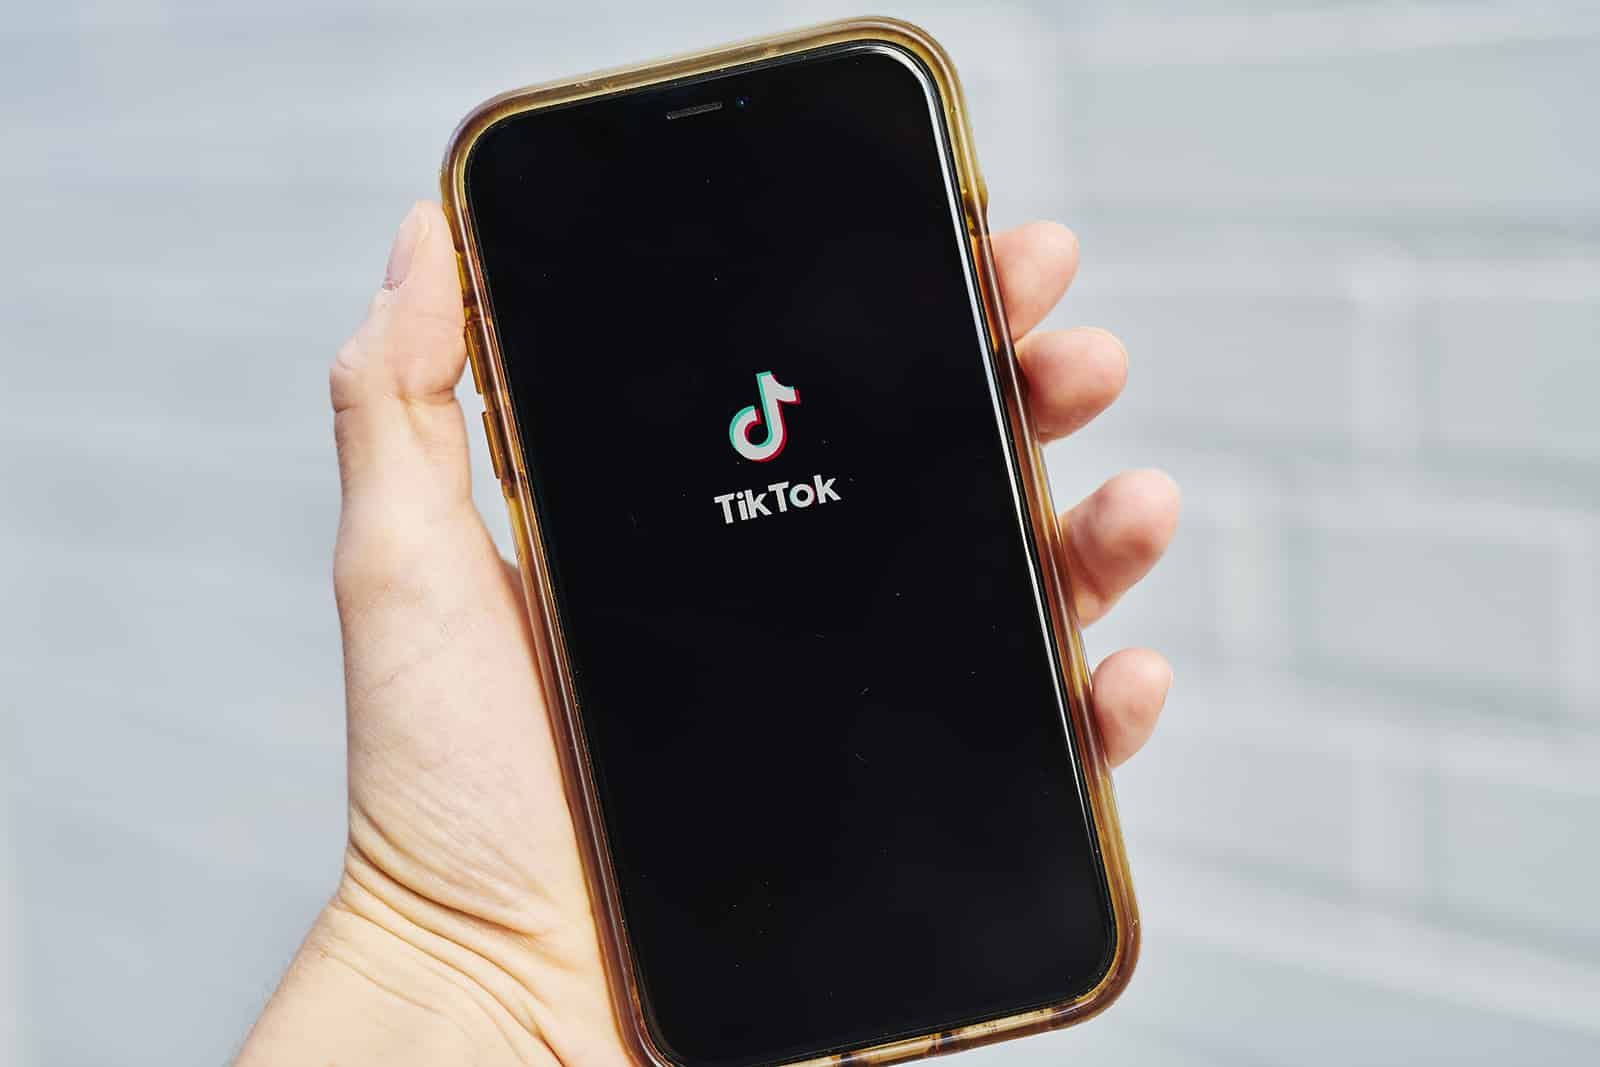 TikTok could be sold to American investors to avert US ban, reports say